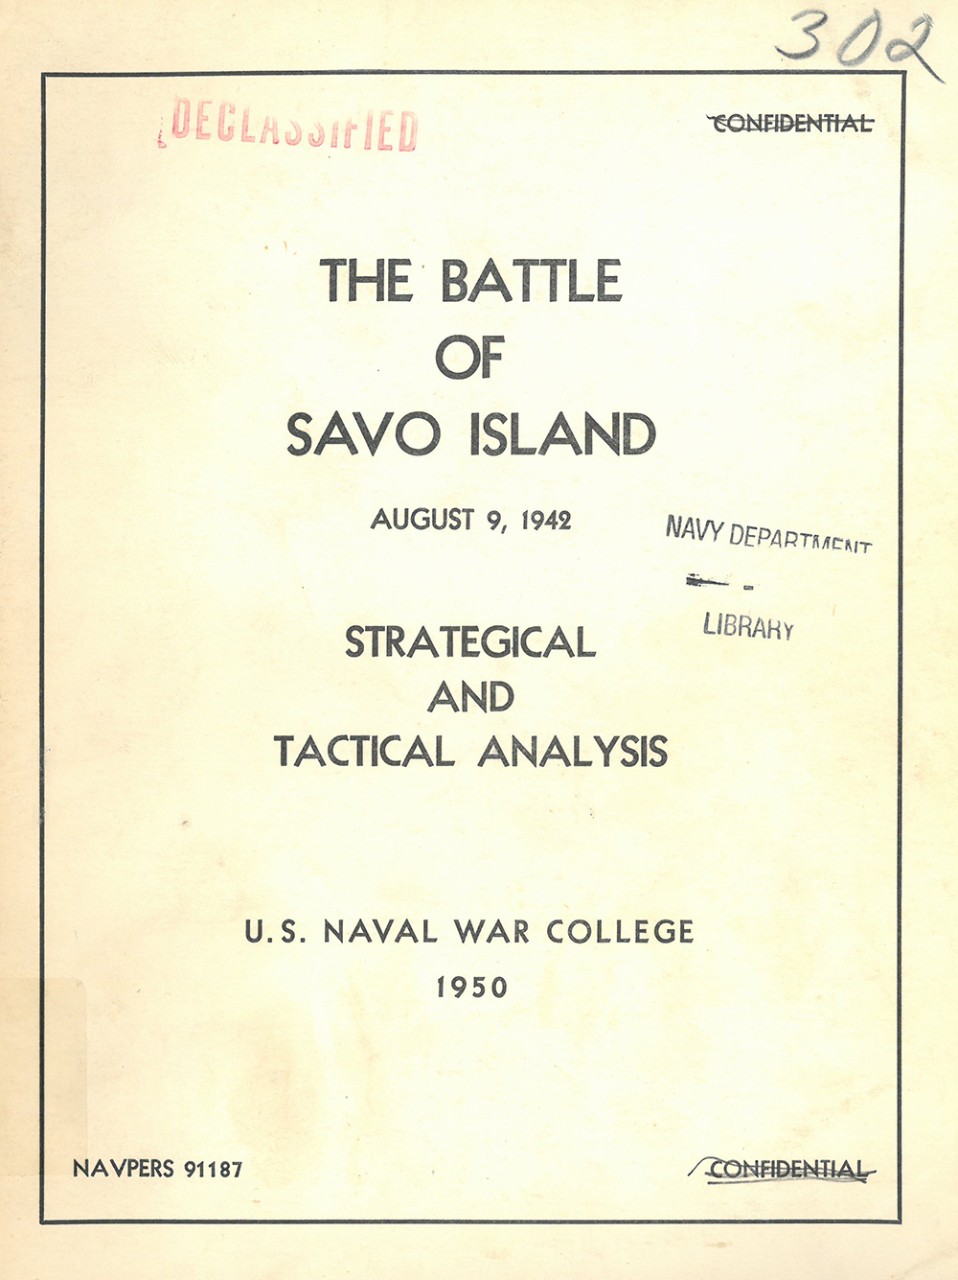 Cover image - The Battle of Savo Island August 9, 1942 Strategical and Tactical Analysis